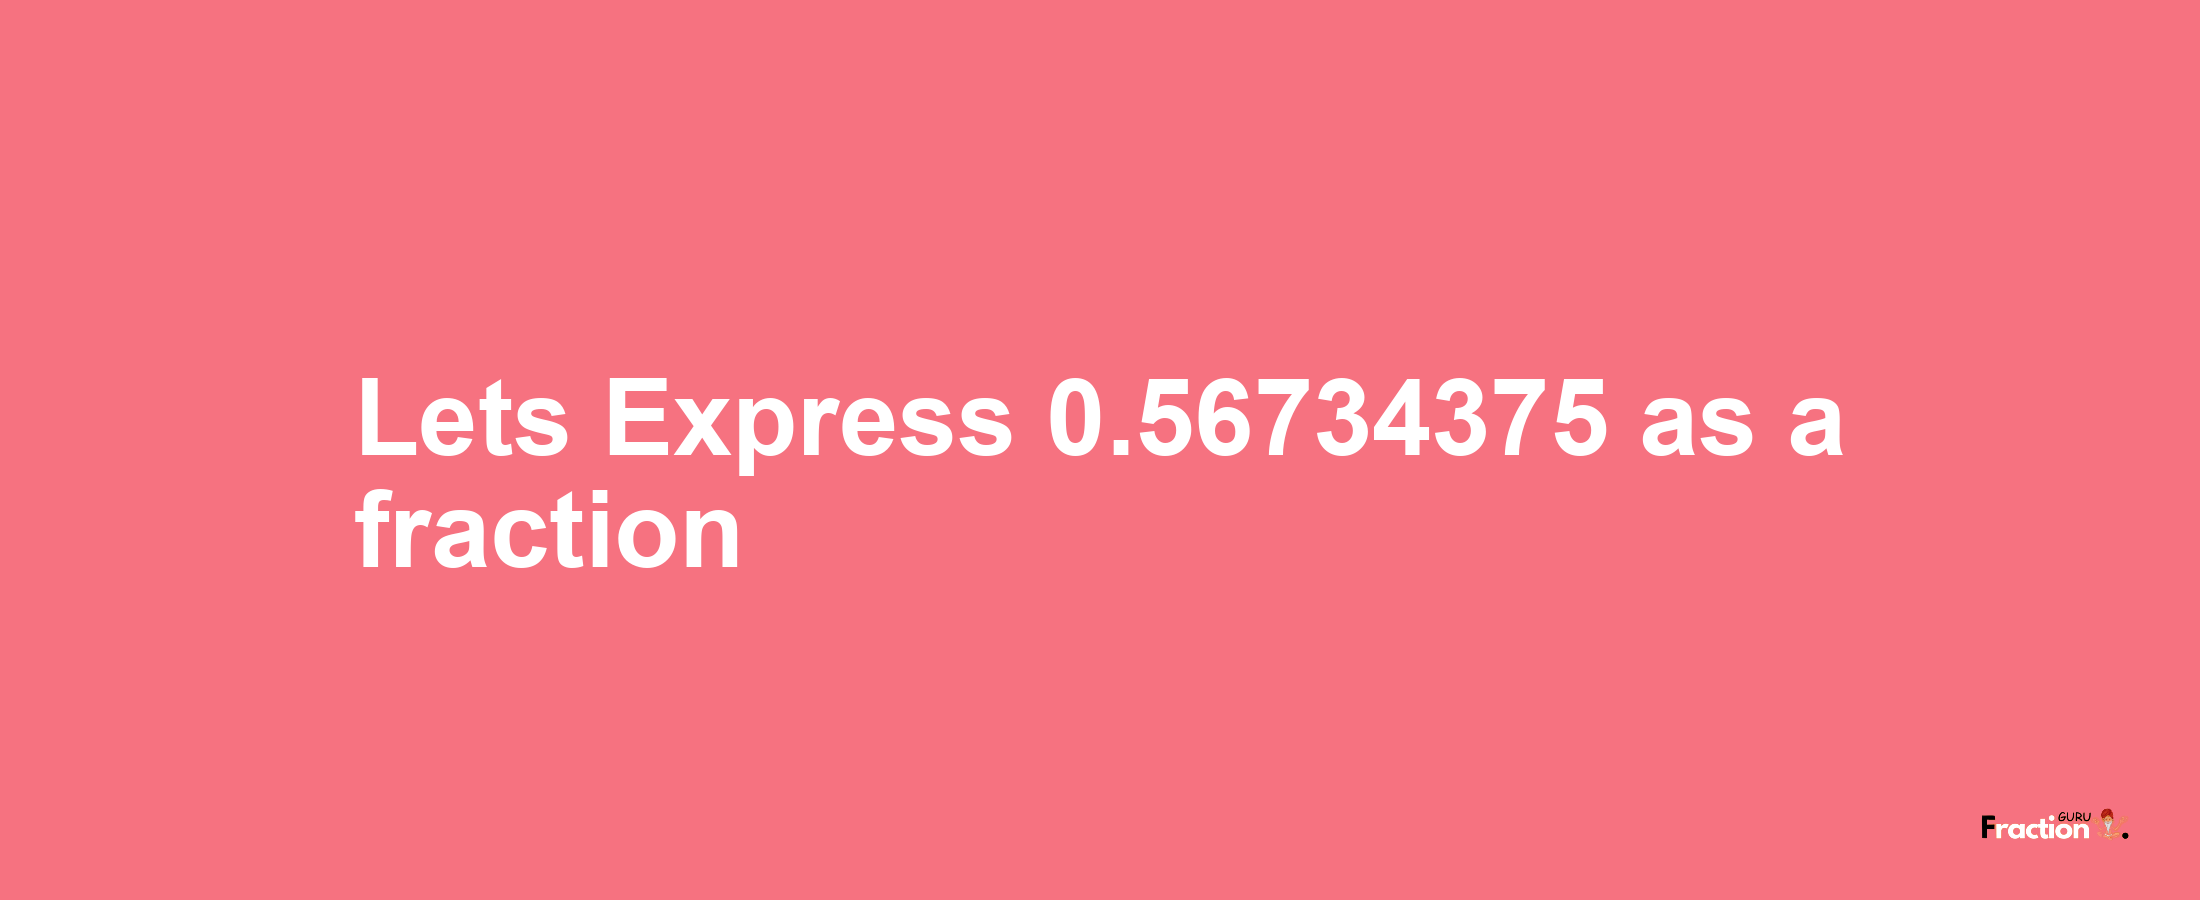 Lets Express 0.56734375 as afraction